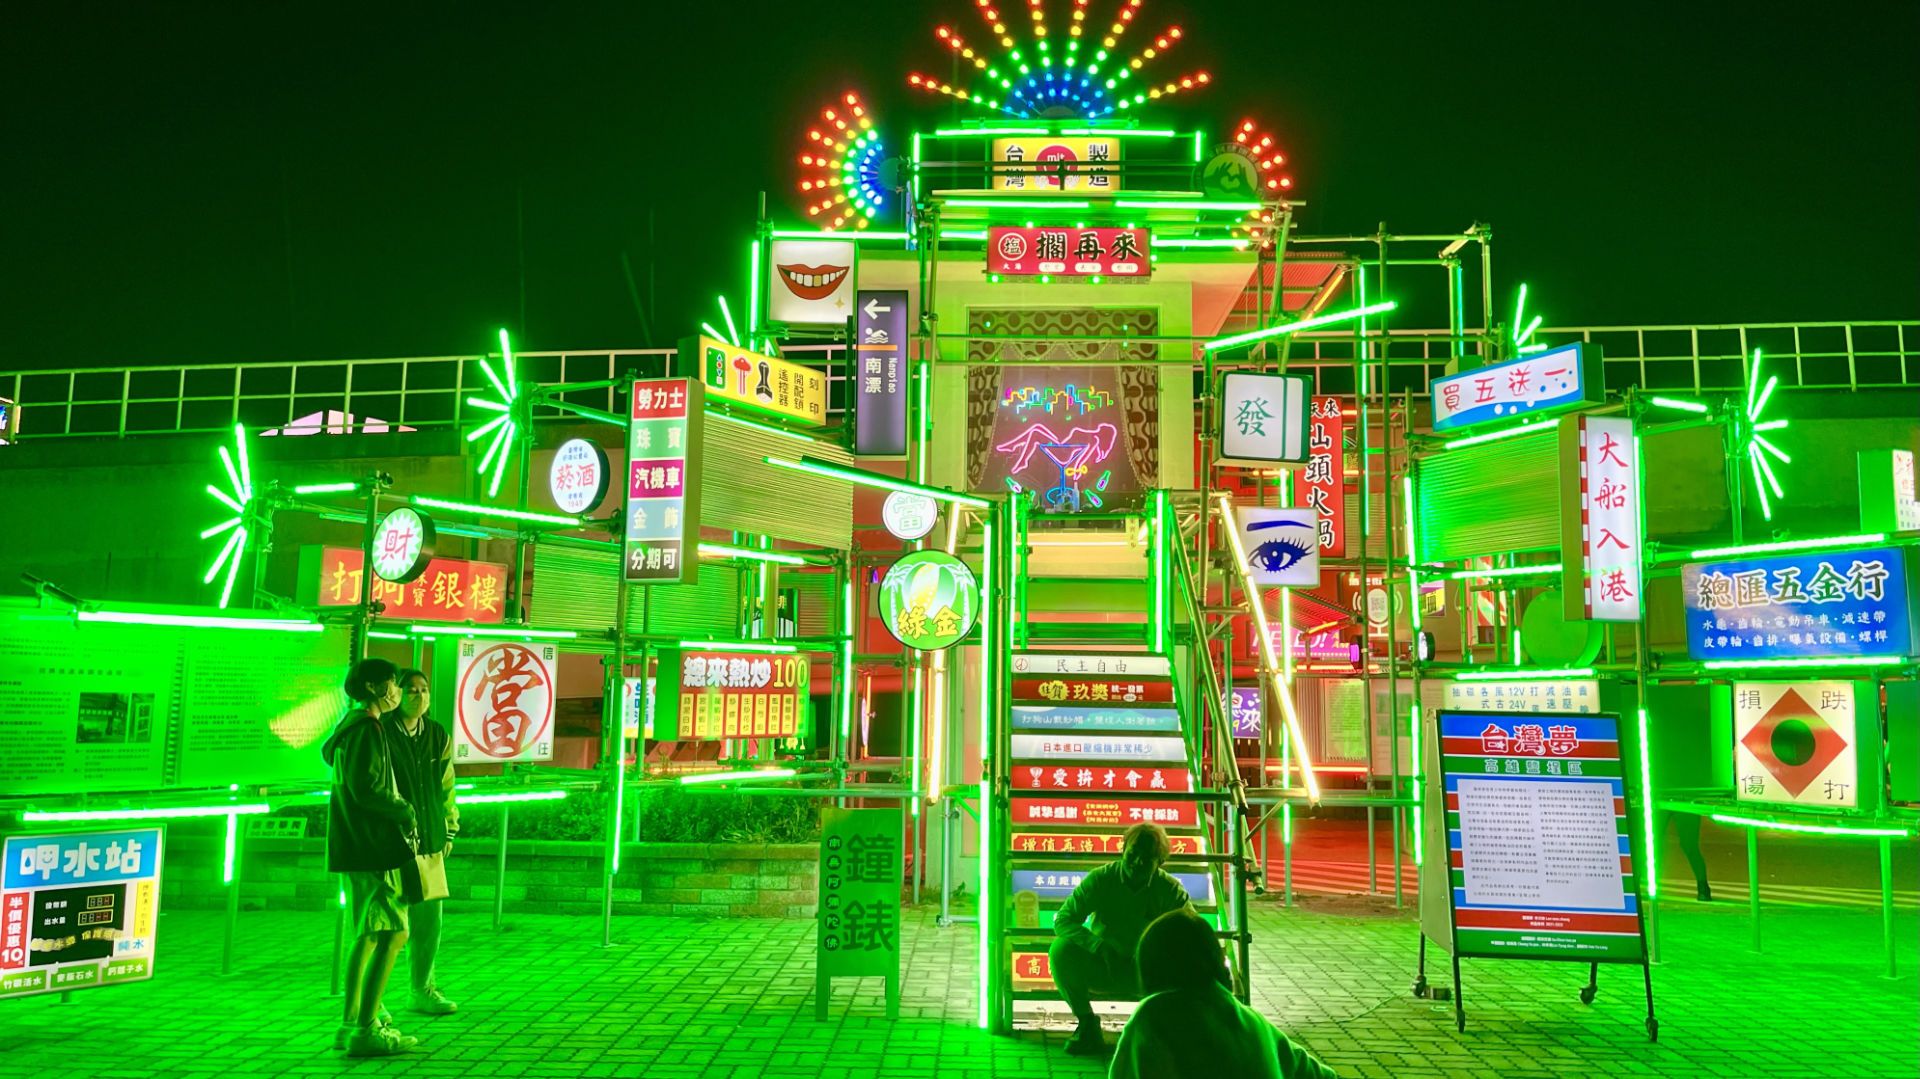 A scaffold-like structure, about 5 meters tall, brightly illuminated and covered in Chinese-language advertising.